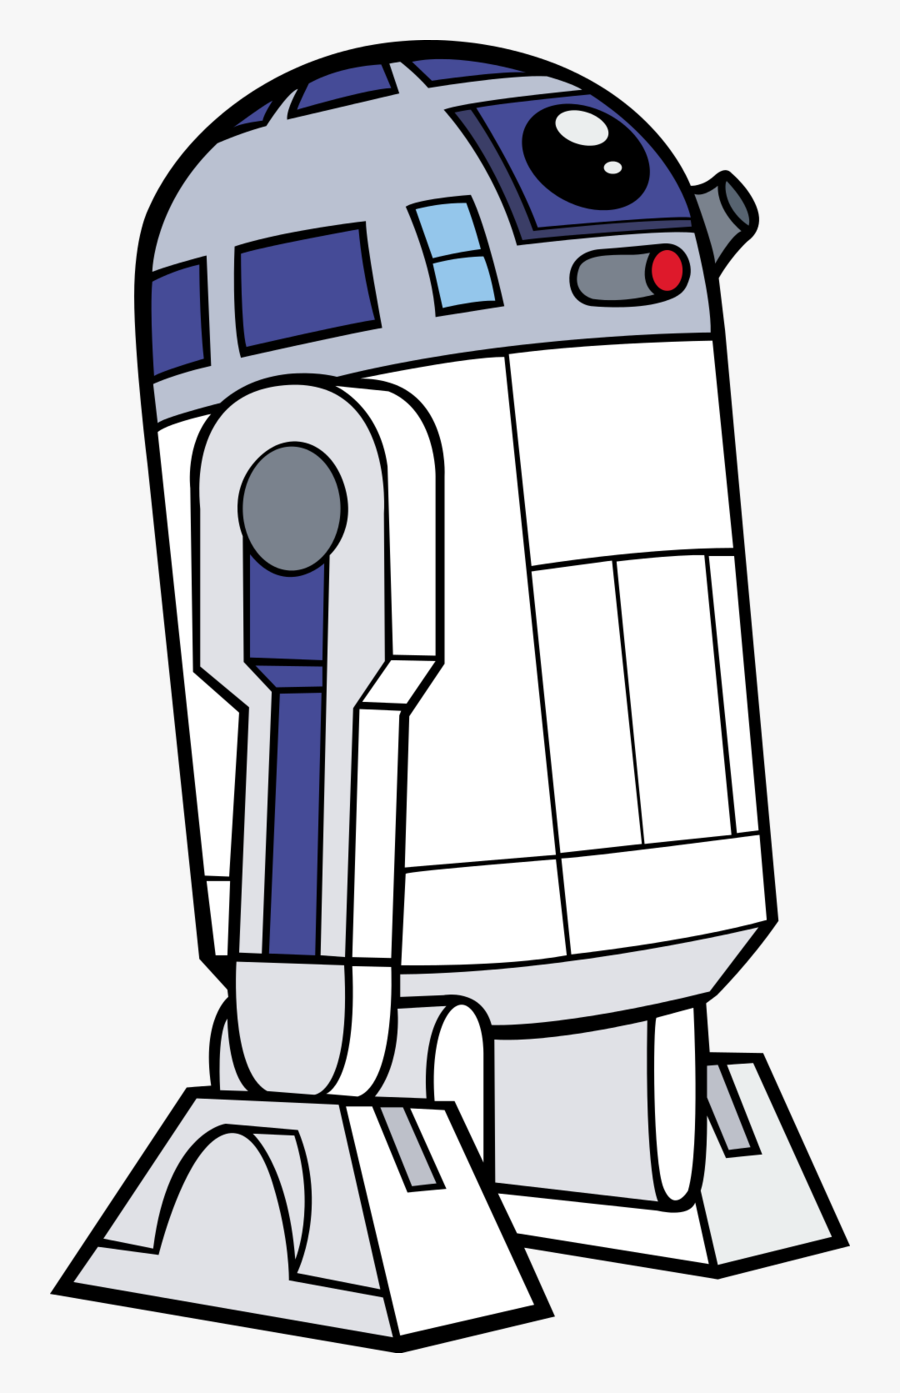 How To Draw R2d2 From Star Wars - Star Wars R2d2 Cartoon, Transparent Clipart